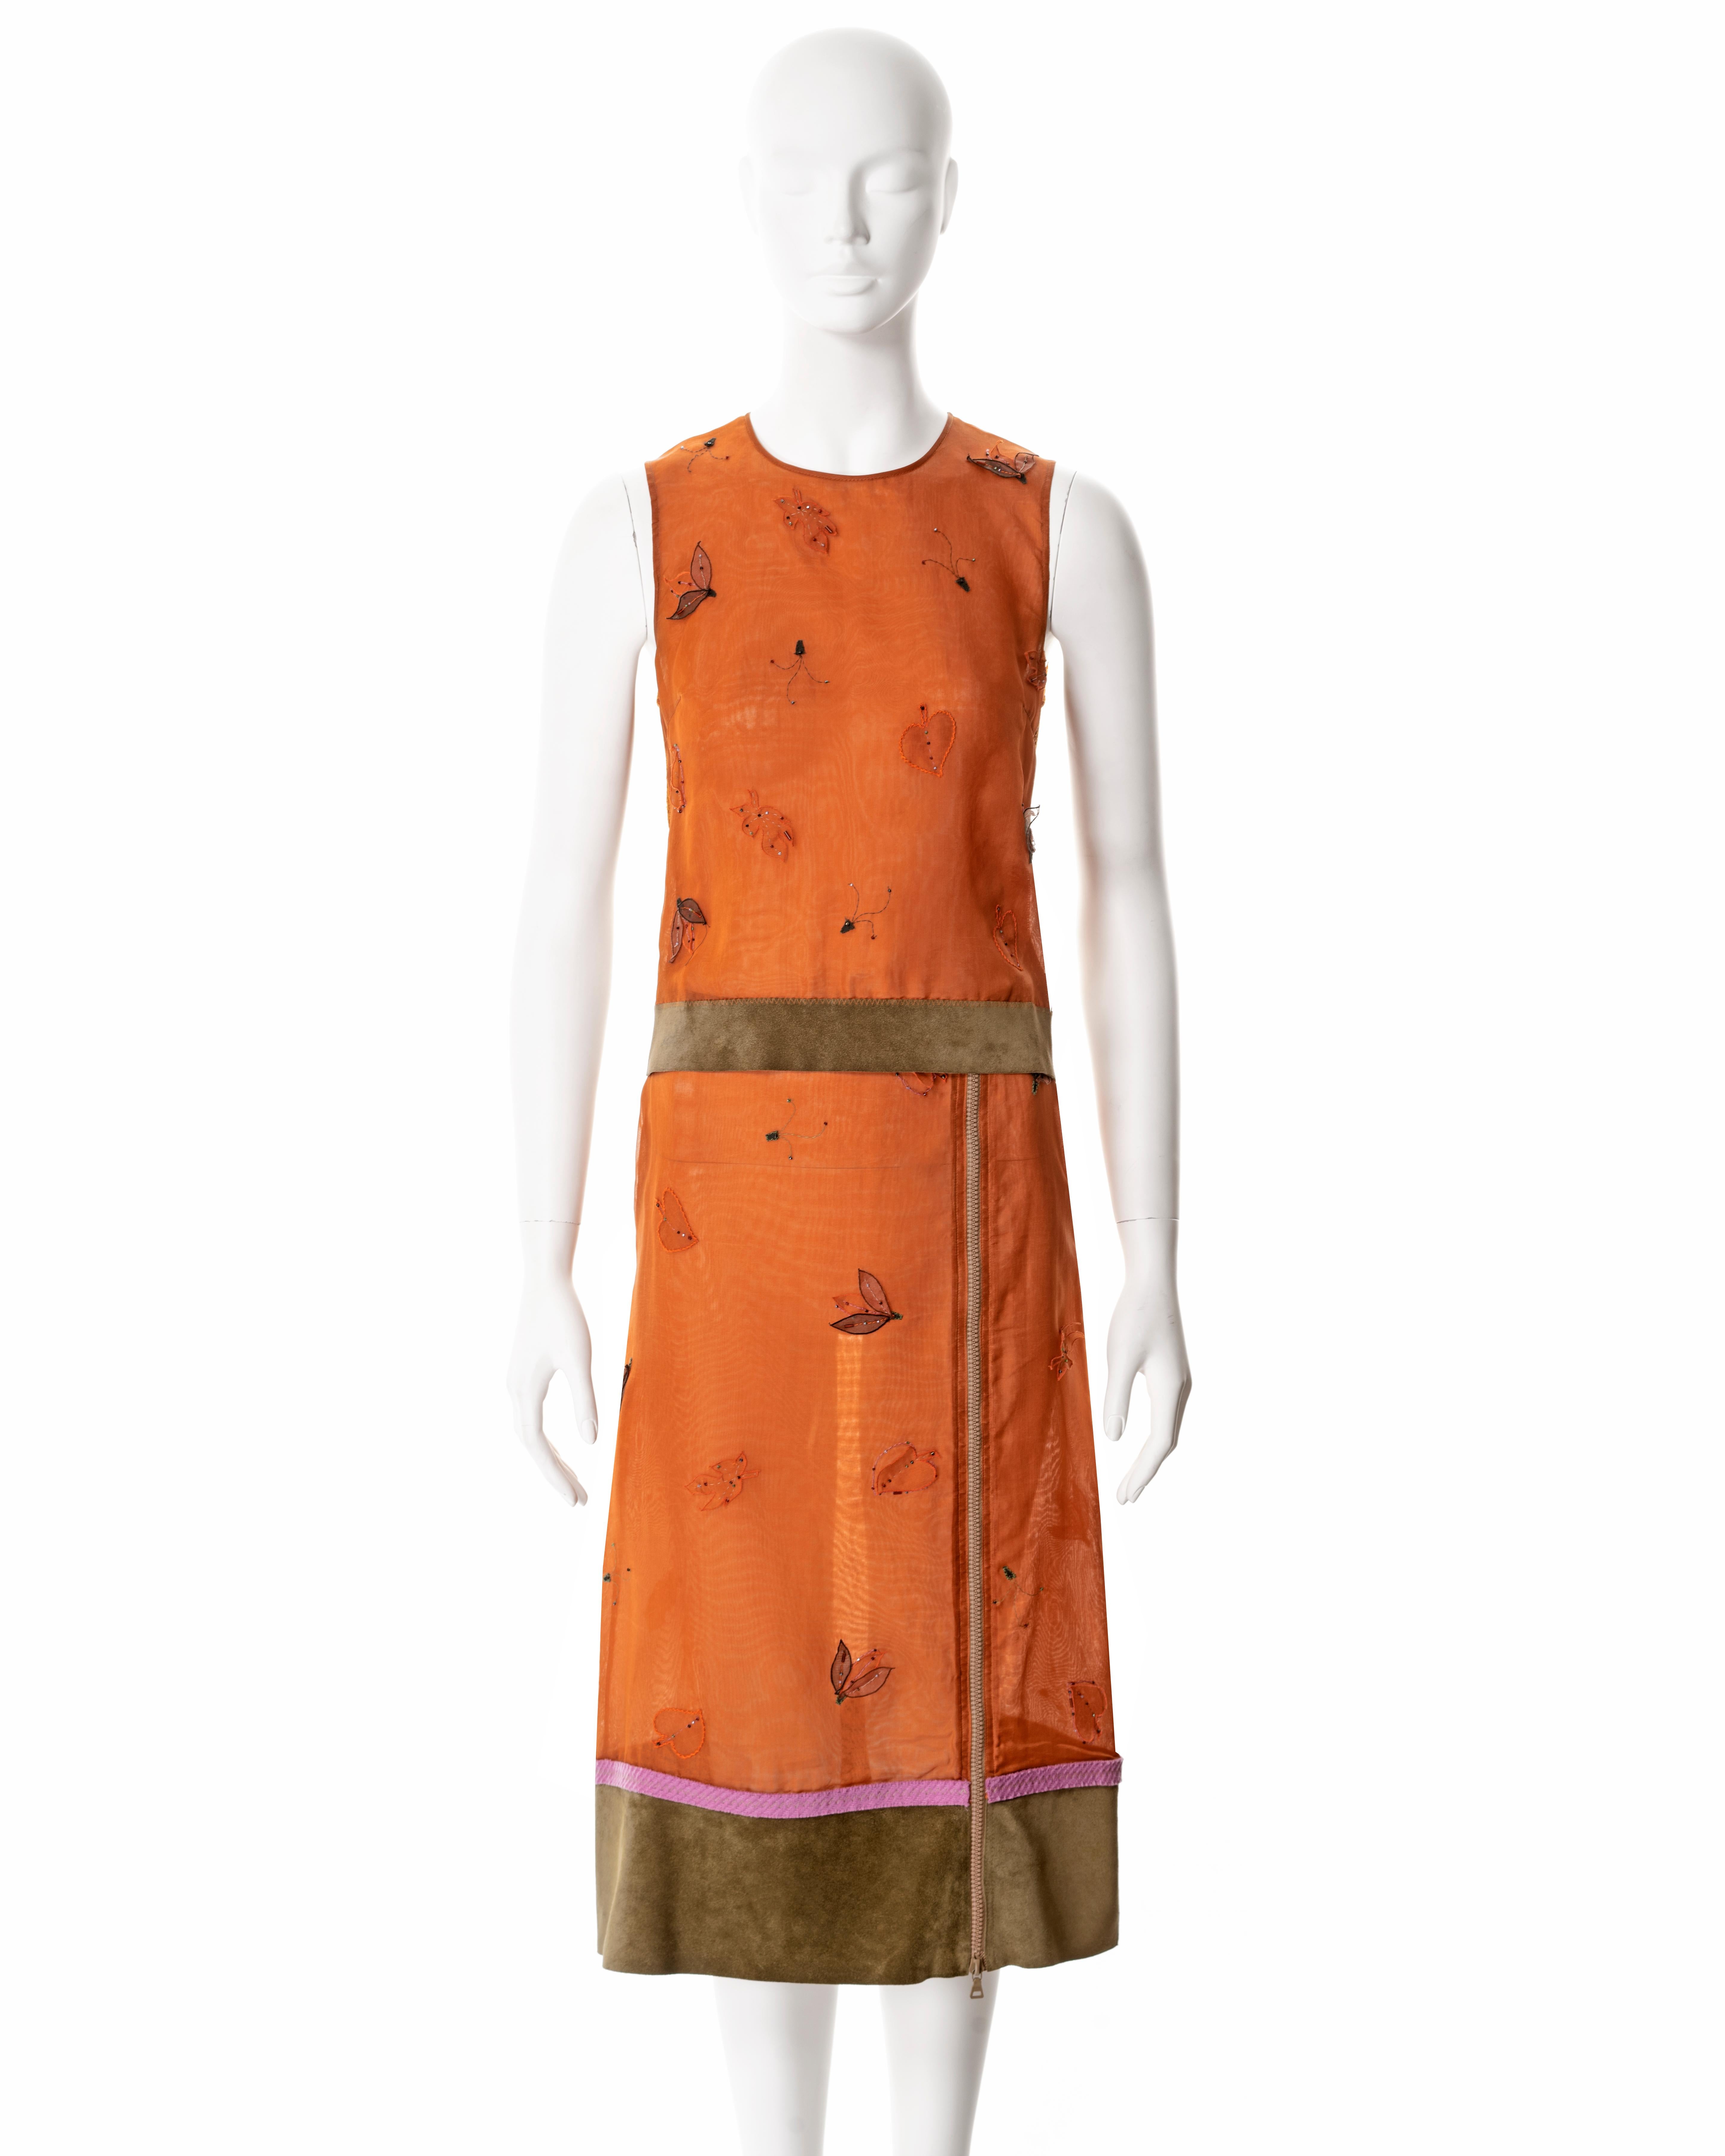 ▪ Prada 2-piece set 
▪ Creative Director: Miuccia Prada
▪ Fall-Winter 1999
▪ Constructed from orange silk organza 
▪ Beaded leaf-shaped organza appliques 
▪ Green suede trim 
▪ Crew-neck tank with mesh back panel 
▪ Calf-length a-line skirt with